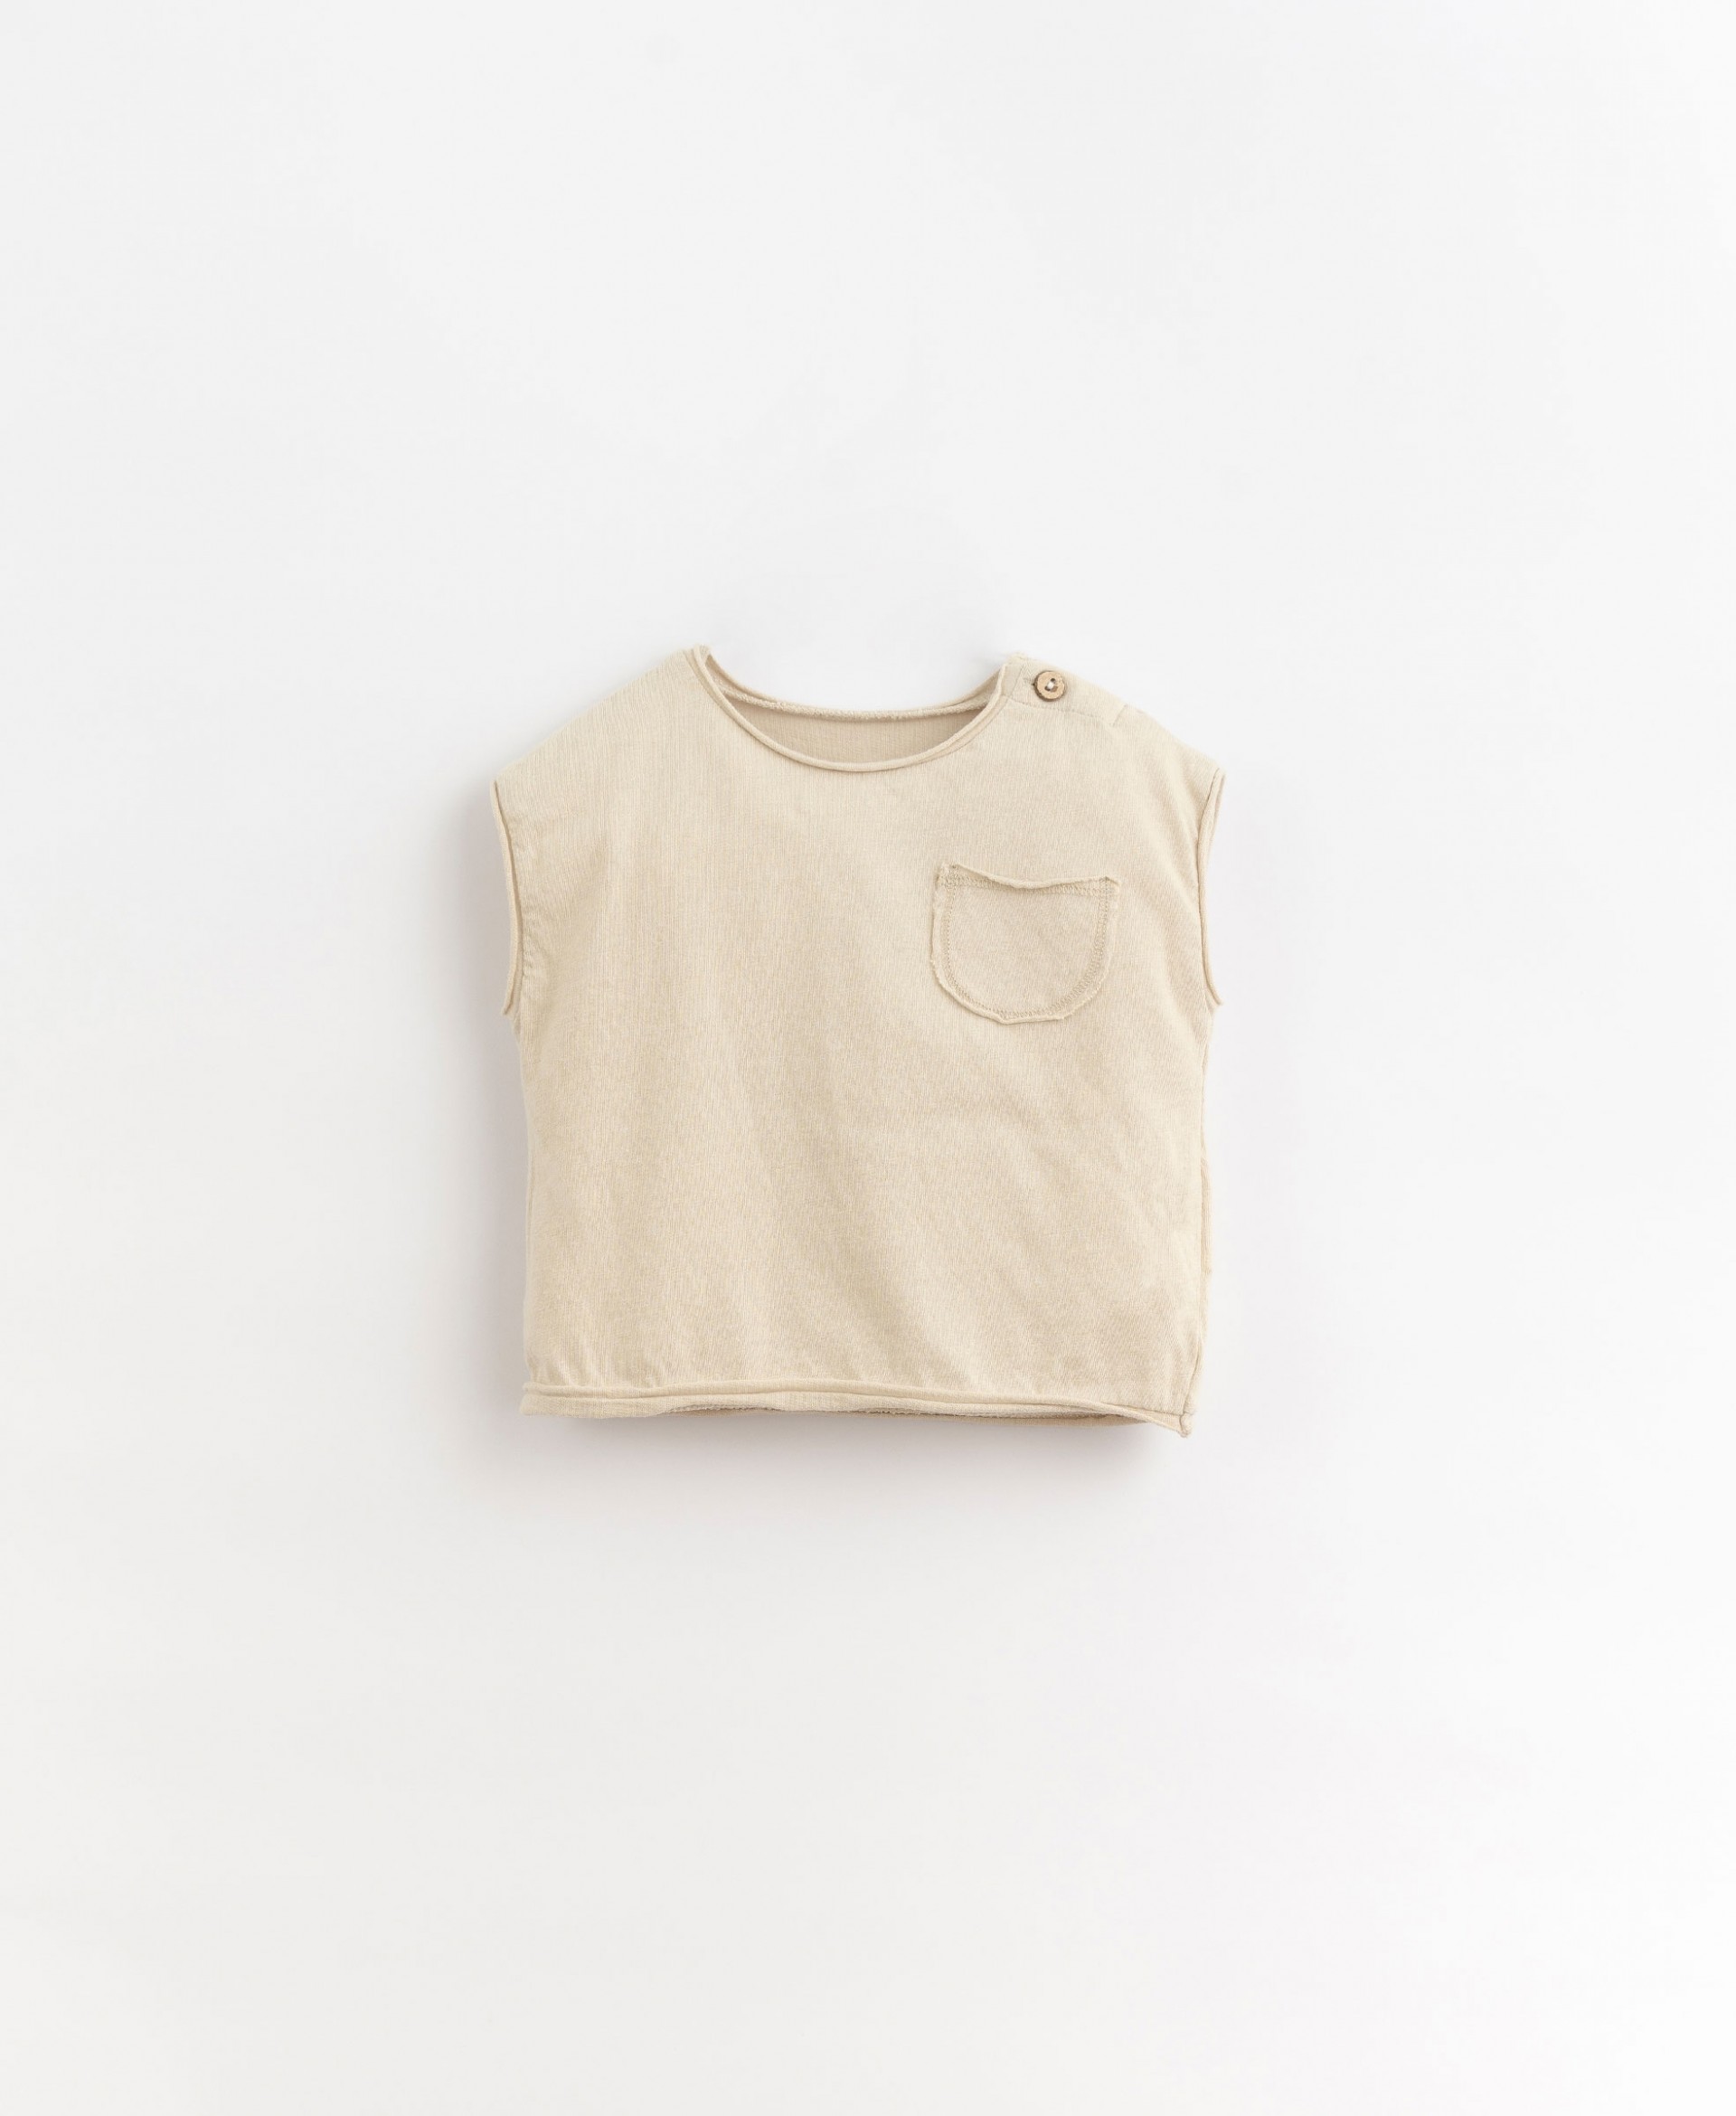 Sleeveless T-shirt with shoulder opening | Organic Care